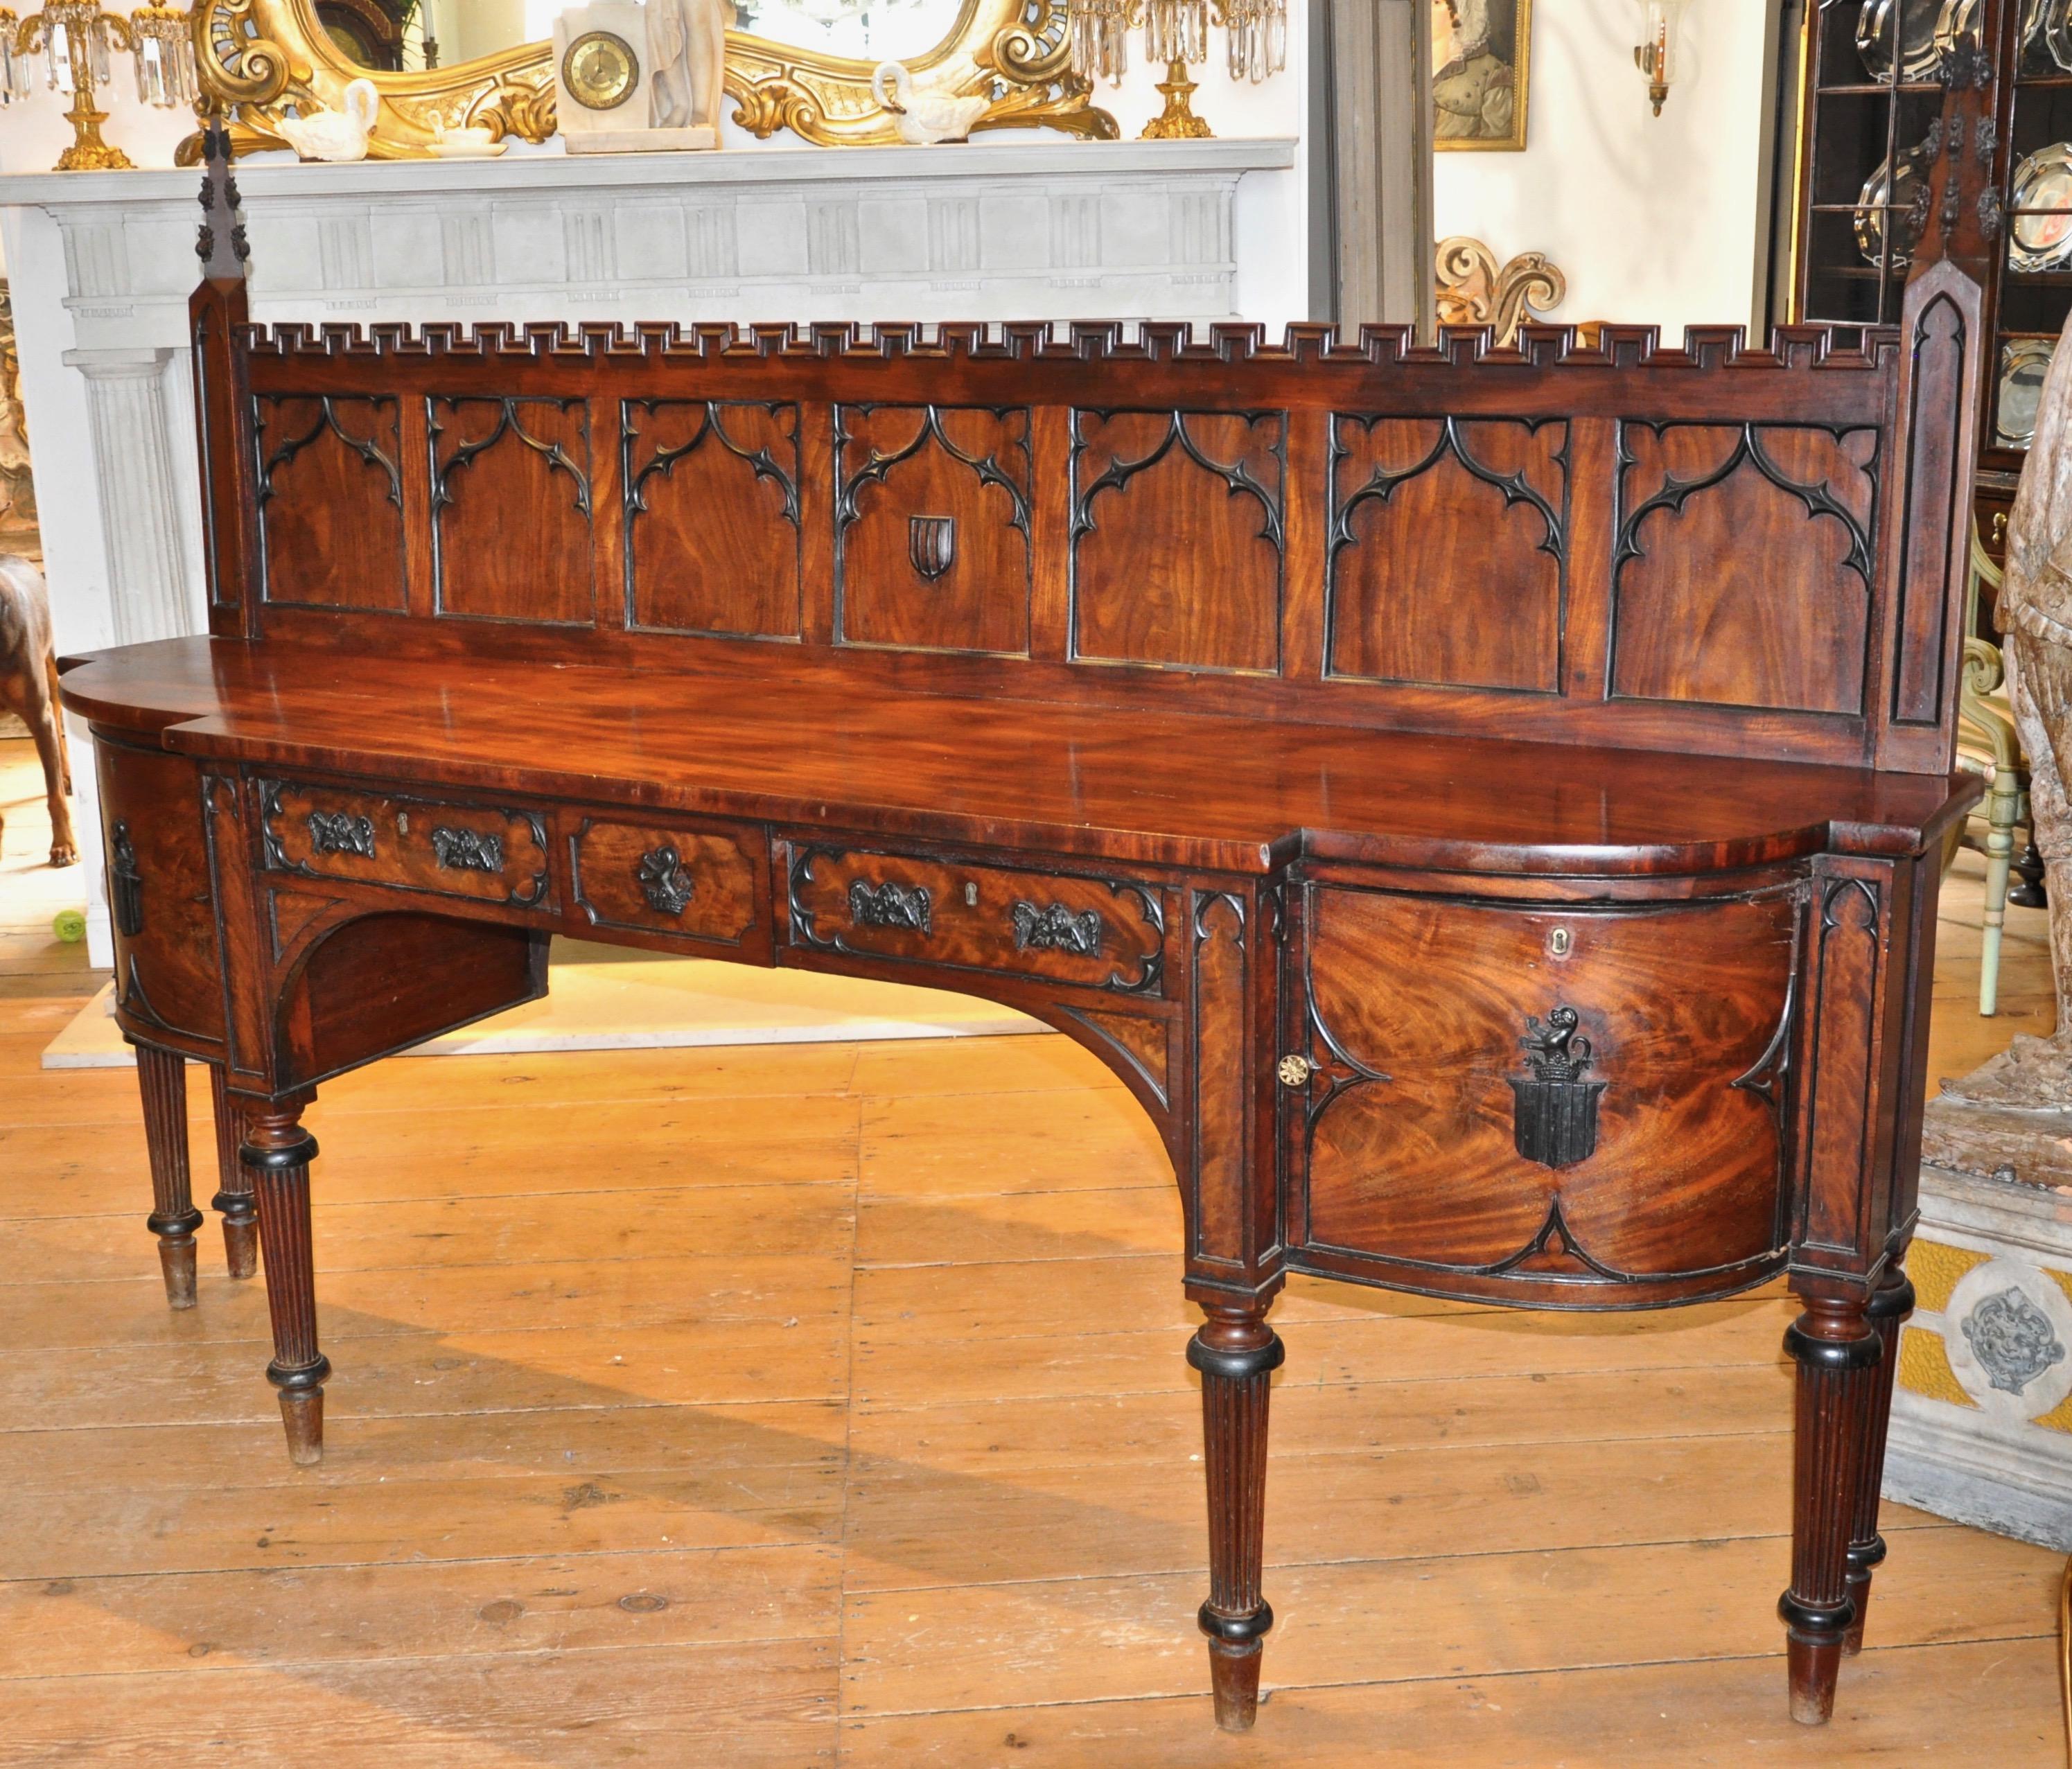 Period Gillows attributed mahogany sideboard of the late Georgian period

--Gothic panel, Anglican faces, armorial, rampant dog in marquess crown
--Original wine drawer
--Incredible cuban mahogany figuring
--Finish shown before